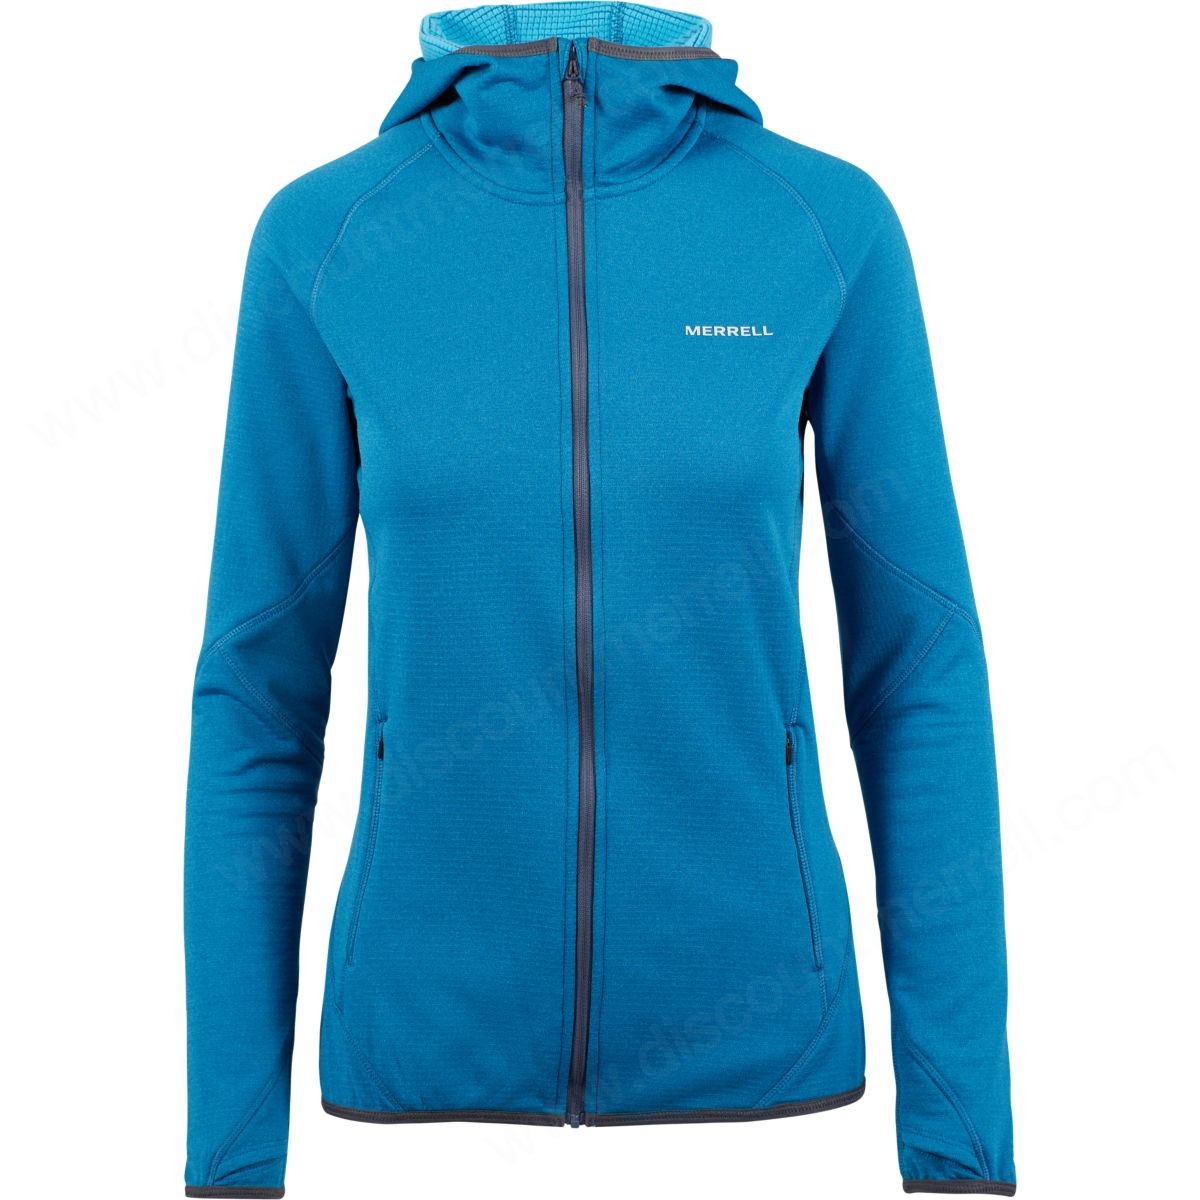 Merrell Women's Midweight Long Sleeve Full Zip Mid-Layer With Drirelease® Fabric Bering Sea Heather - Merrell Women's Midweight Long Sleeve Full Zip Mid-Layer With Drirelease® Fabric Bering Sea Heather